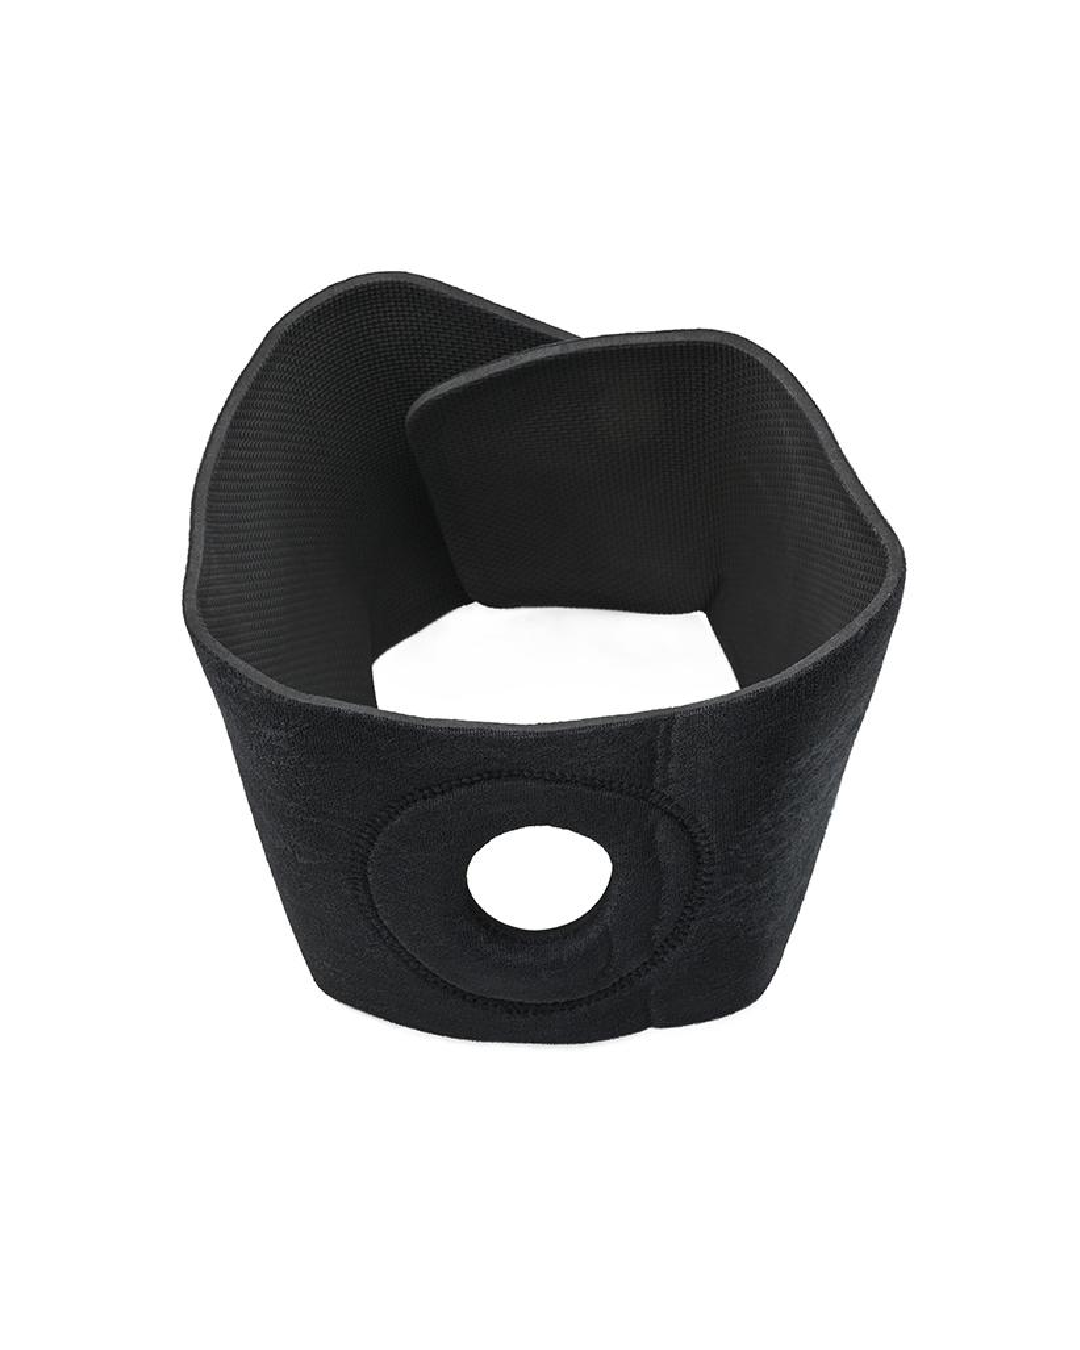 Sportsheets Ultra Thigh Strap-on Harness